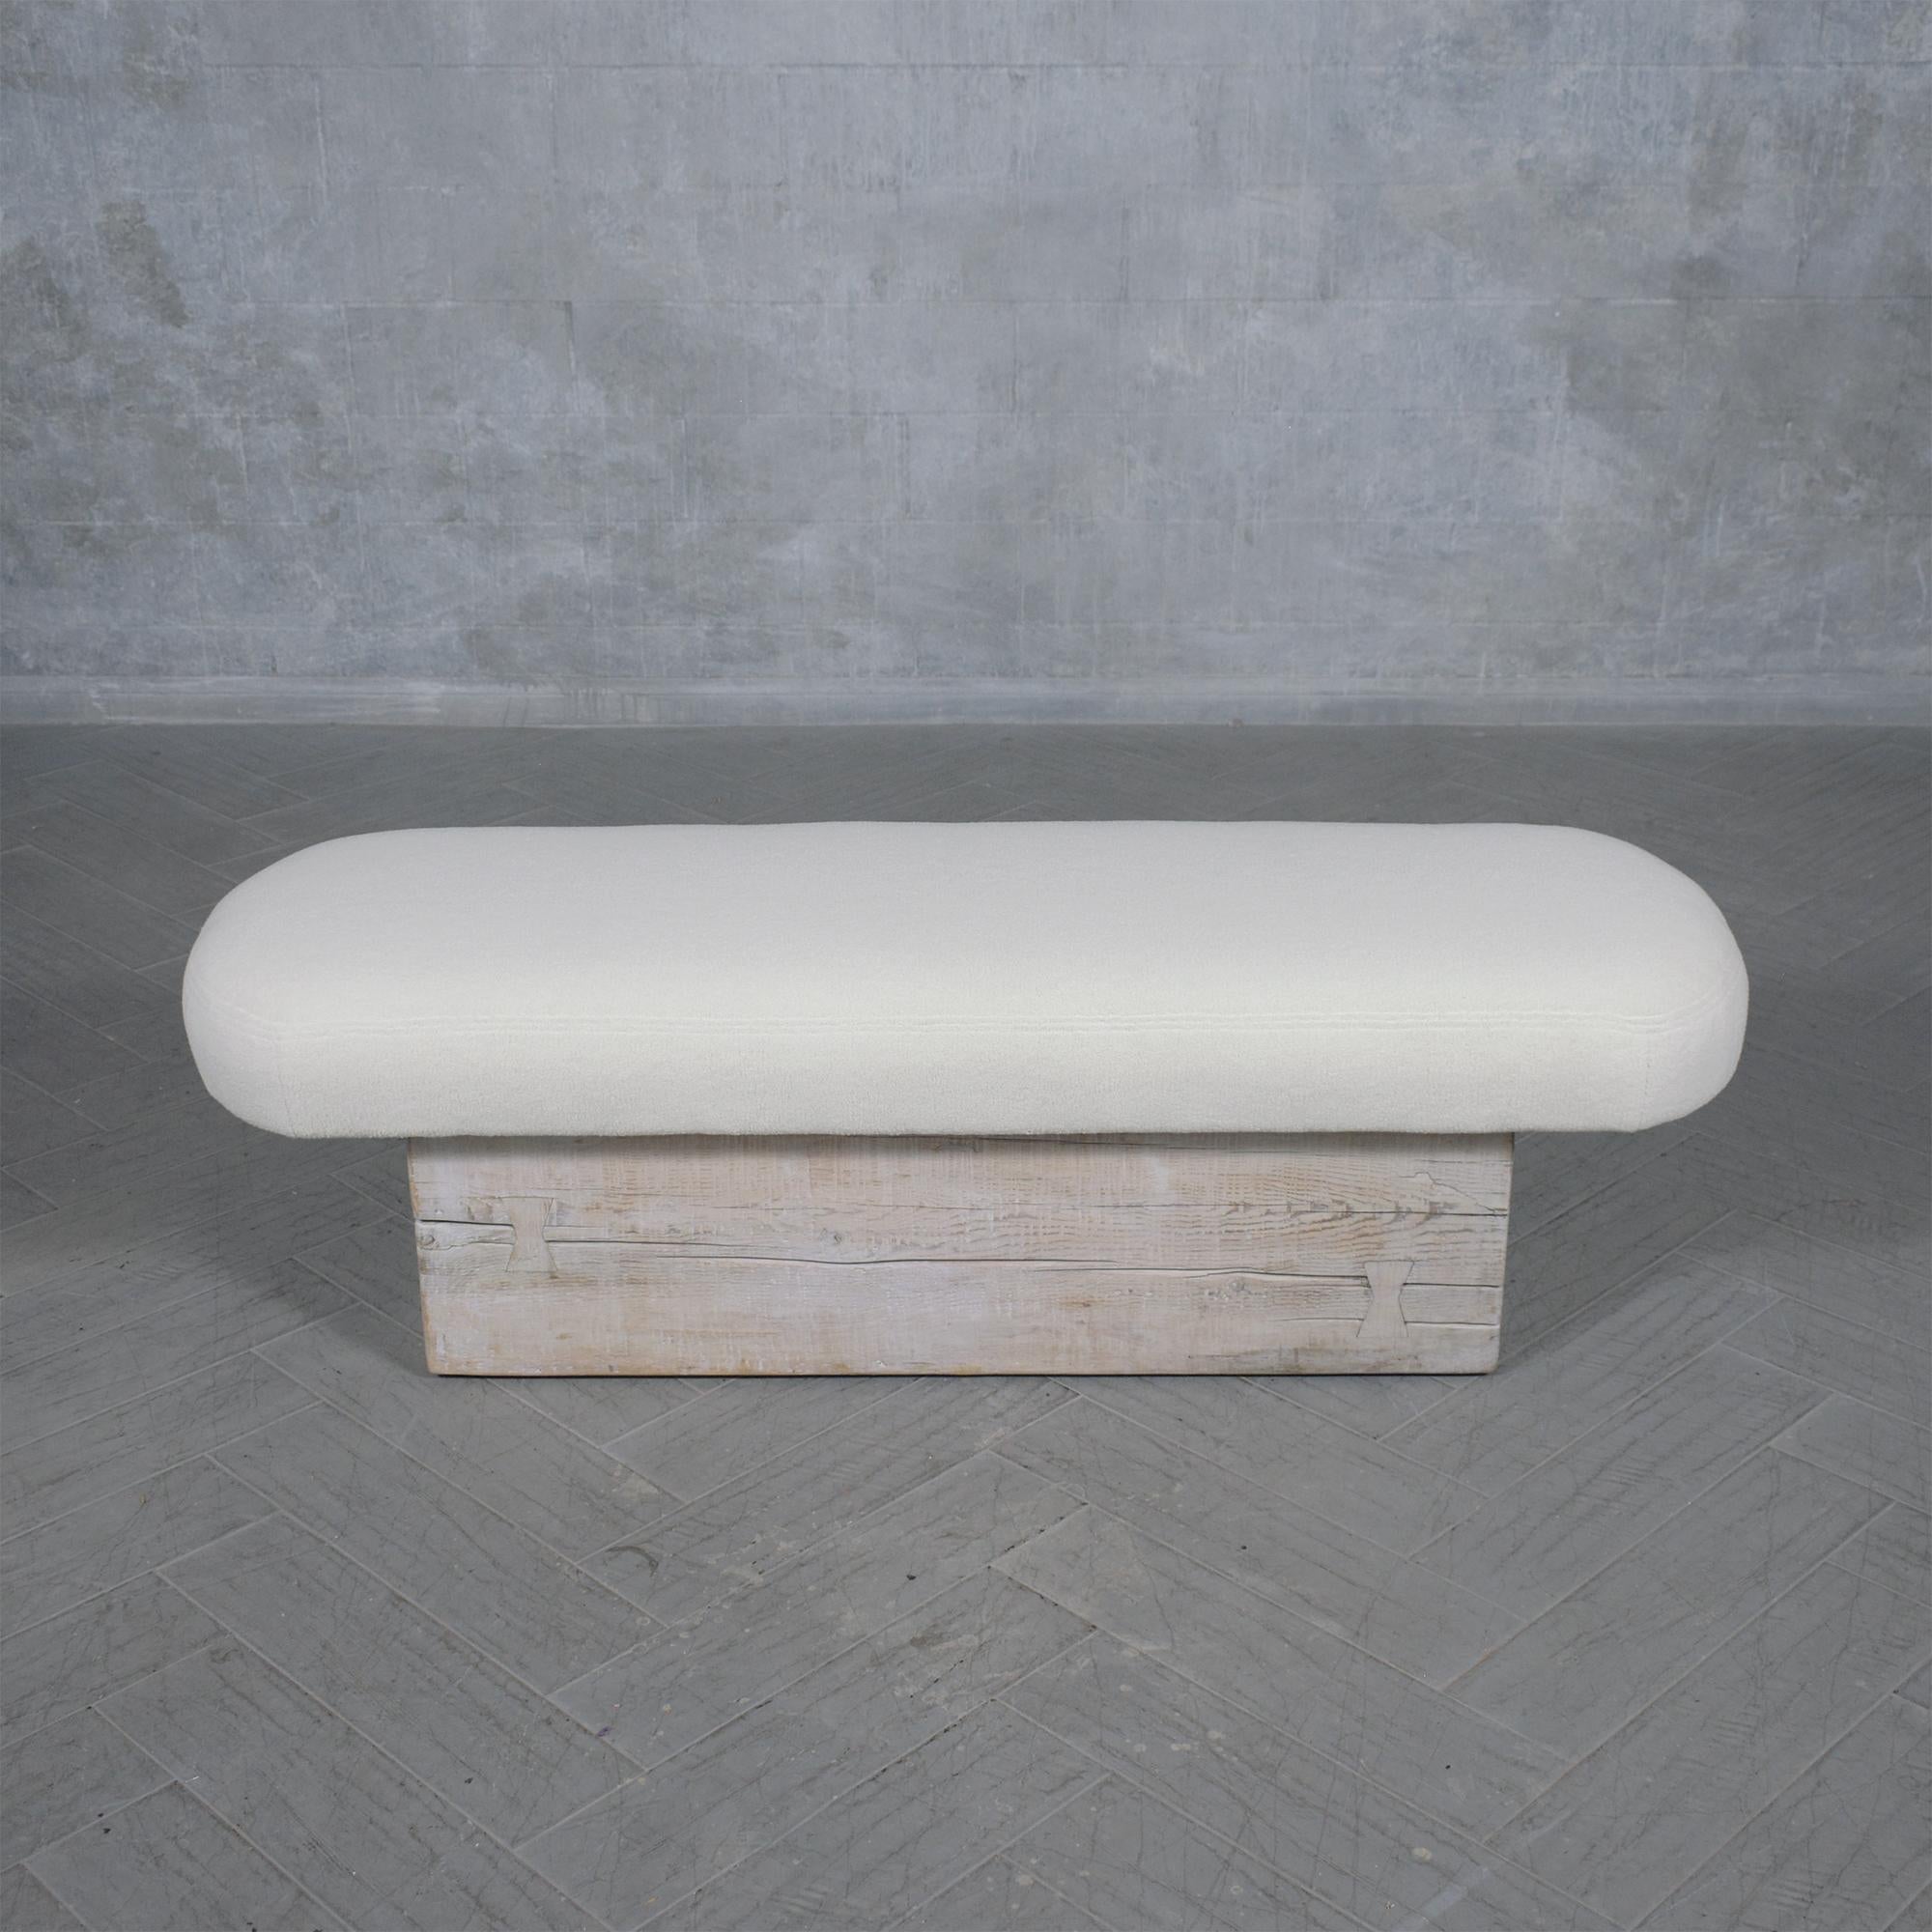 Experience the perfect marriage of modern design and timeless craftsmanship with our beautifully restored modern slab bench. This piece, meticulously crafted from solid wood, exemplifies the skill and attention to detail that marks true artisanal